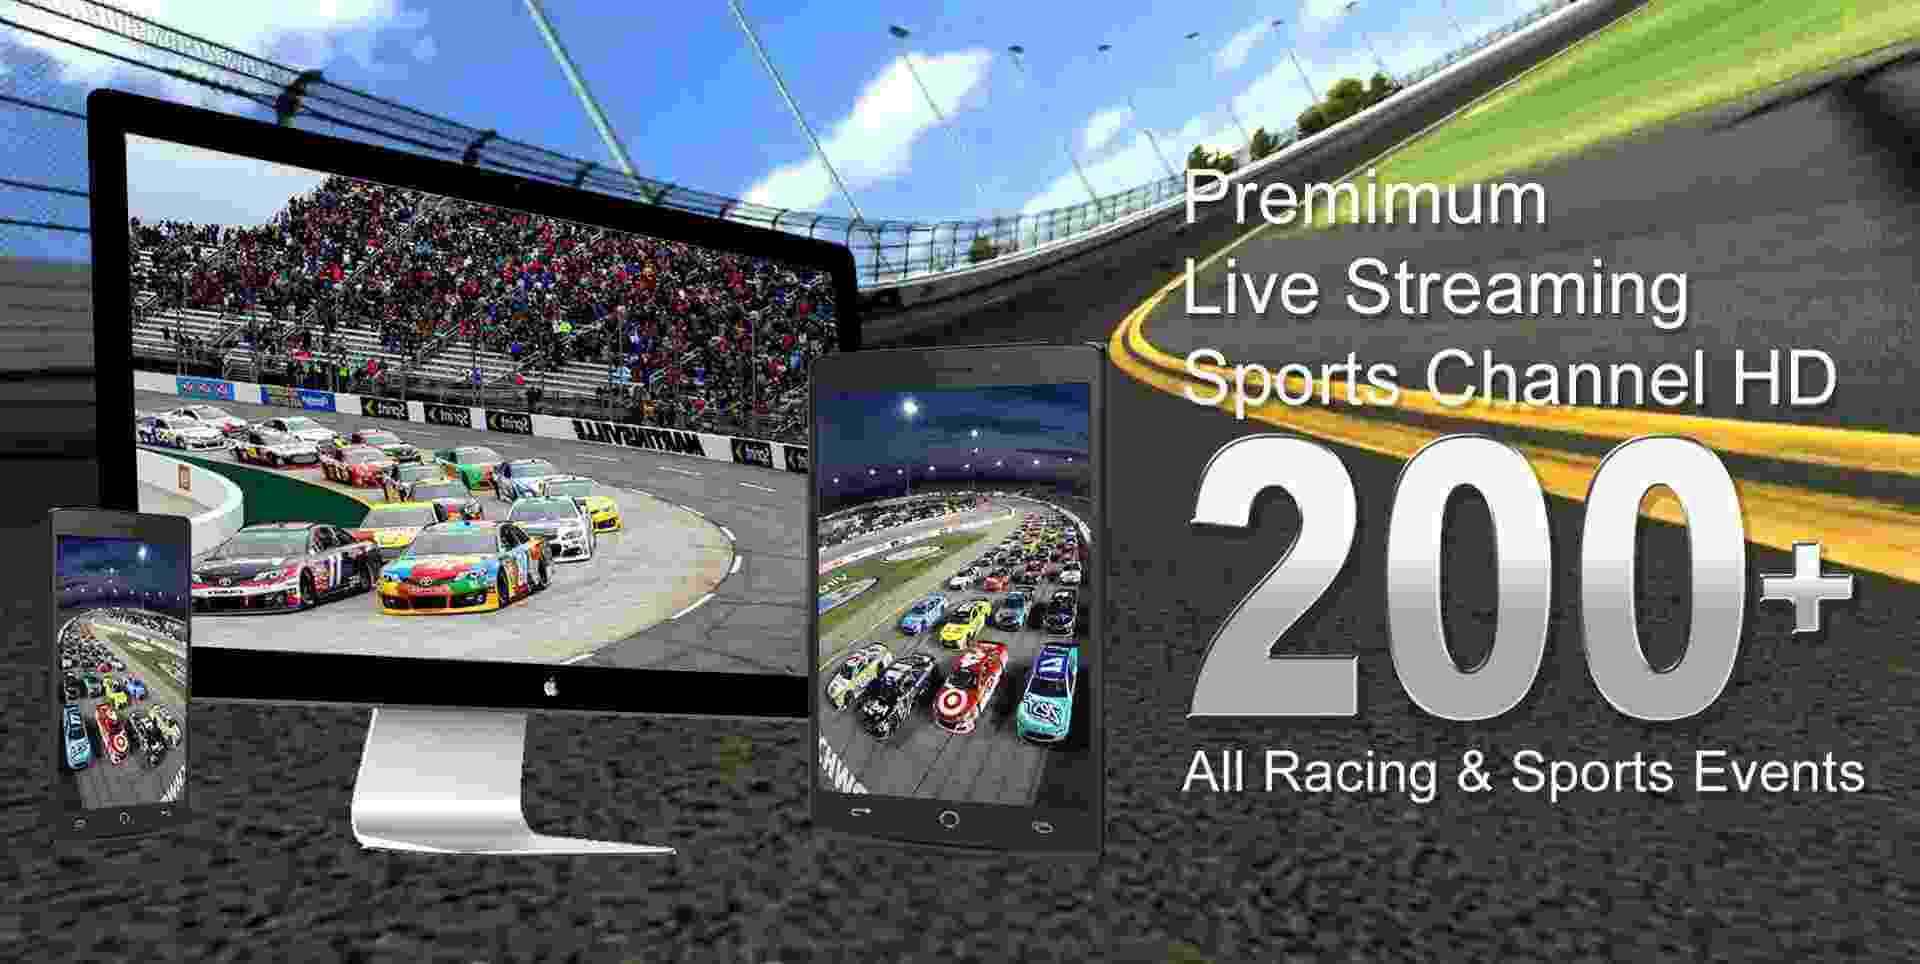 aaa-400-drive-for-autism-nascar-live-stream